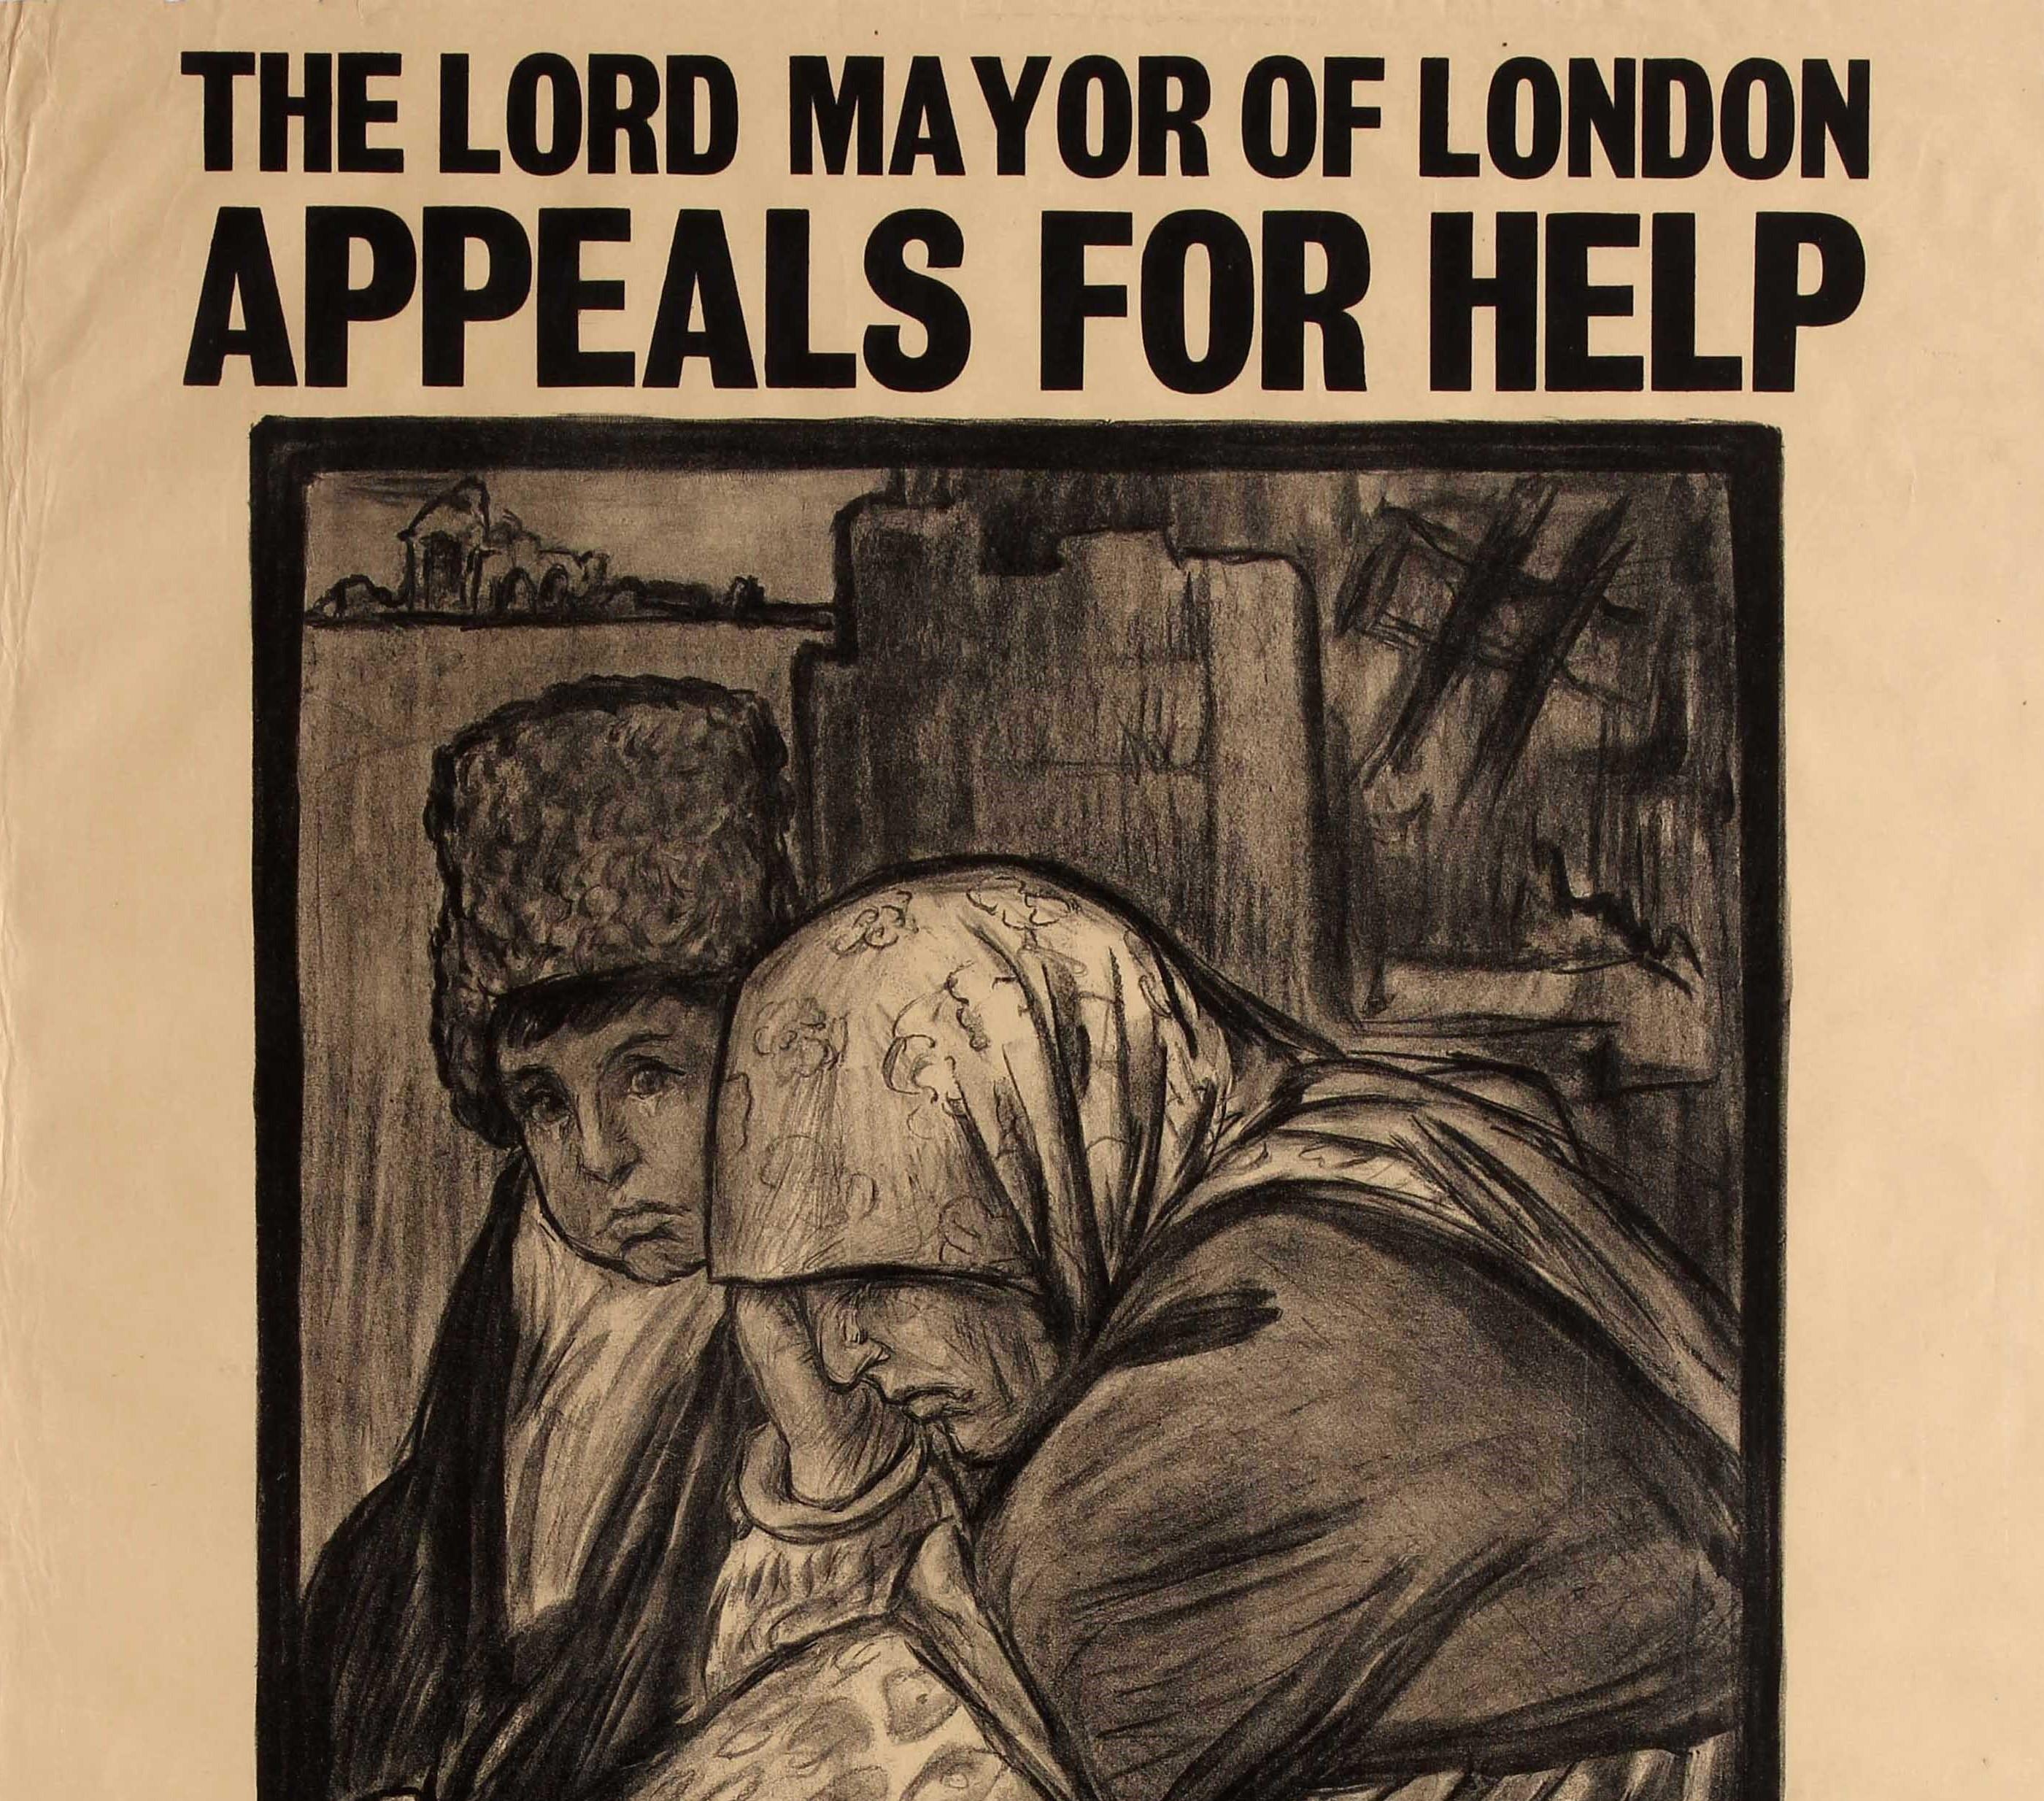 Original antique British World War One propaganda poster - The Lord Mayor of London Appeals For Help Armenia Donations Urgently Needed to rebuild the homes of the Armenian people before the coming winter Hon. Treasurer: The Armenian Refugees (Lord